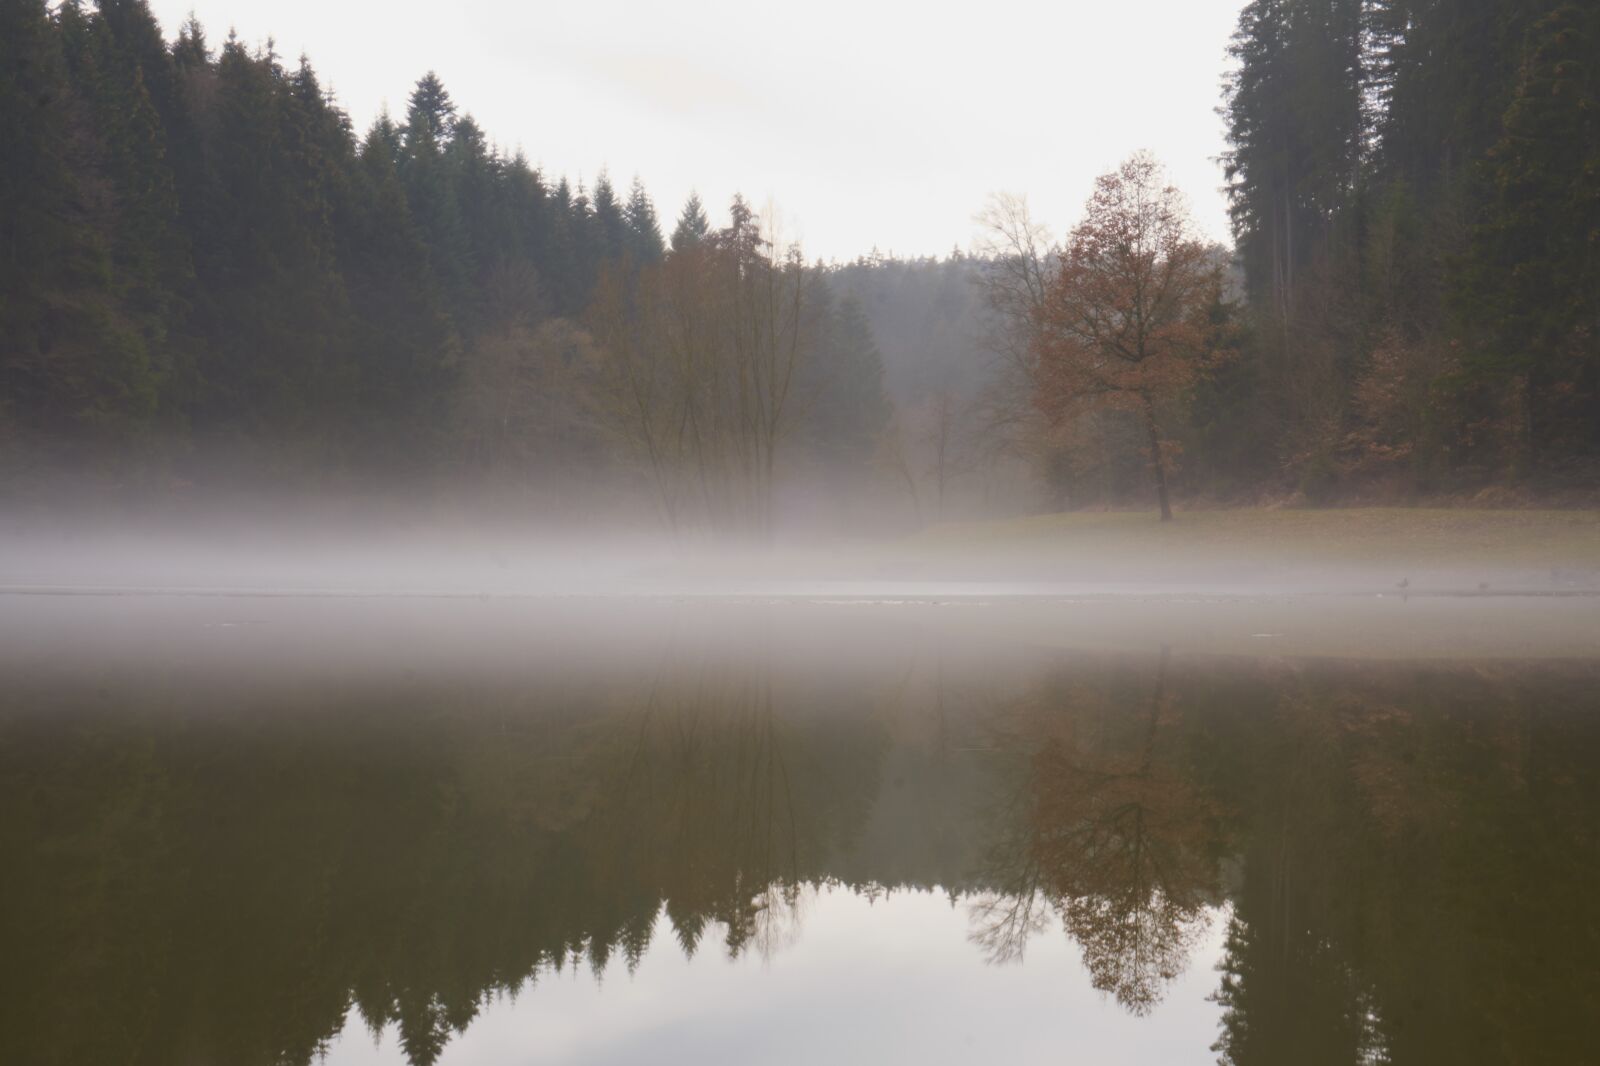 Sony E PZ 16-50 mm F3.5-5.6 OSS (SELP1650) sample photo. Lake, fog, forest photography